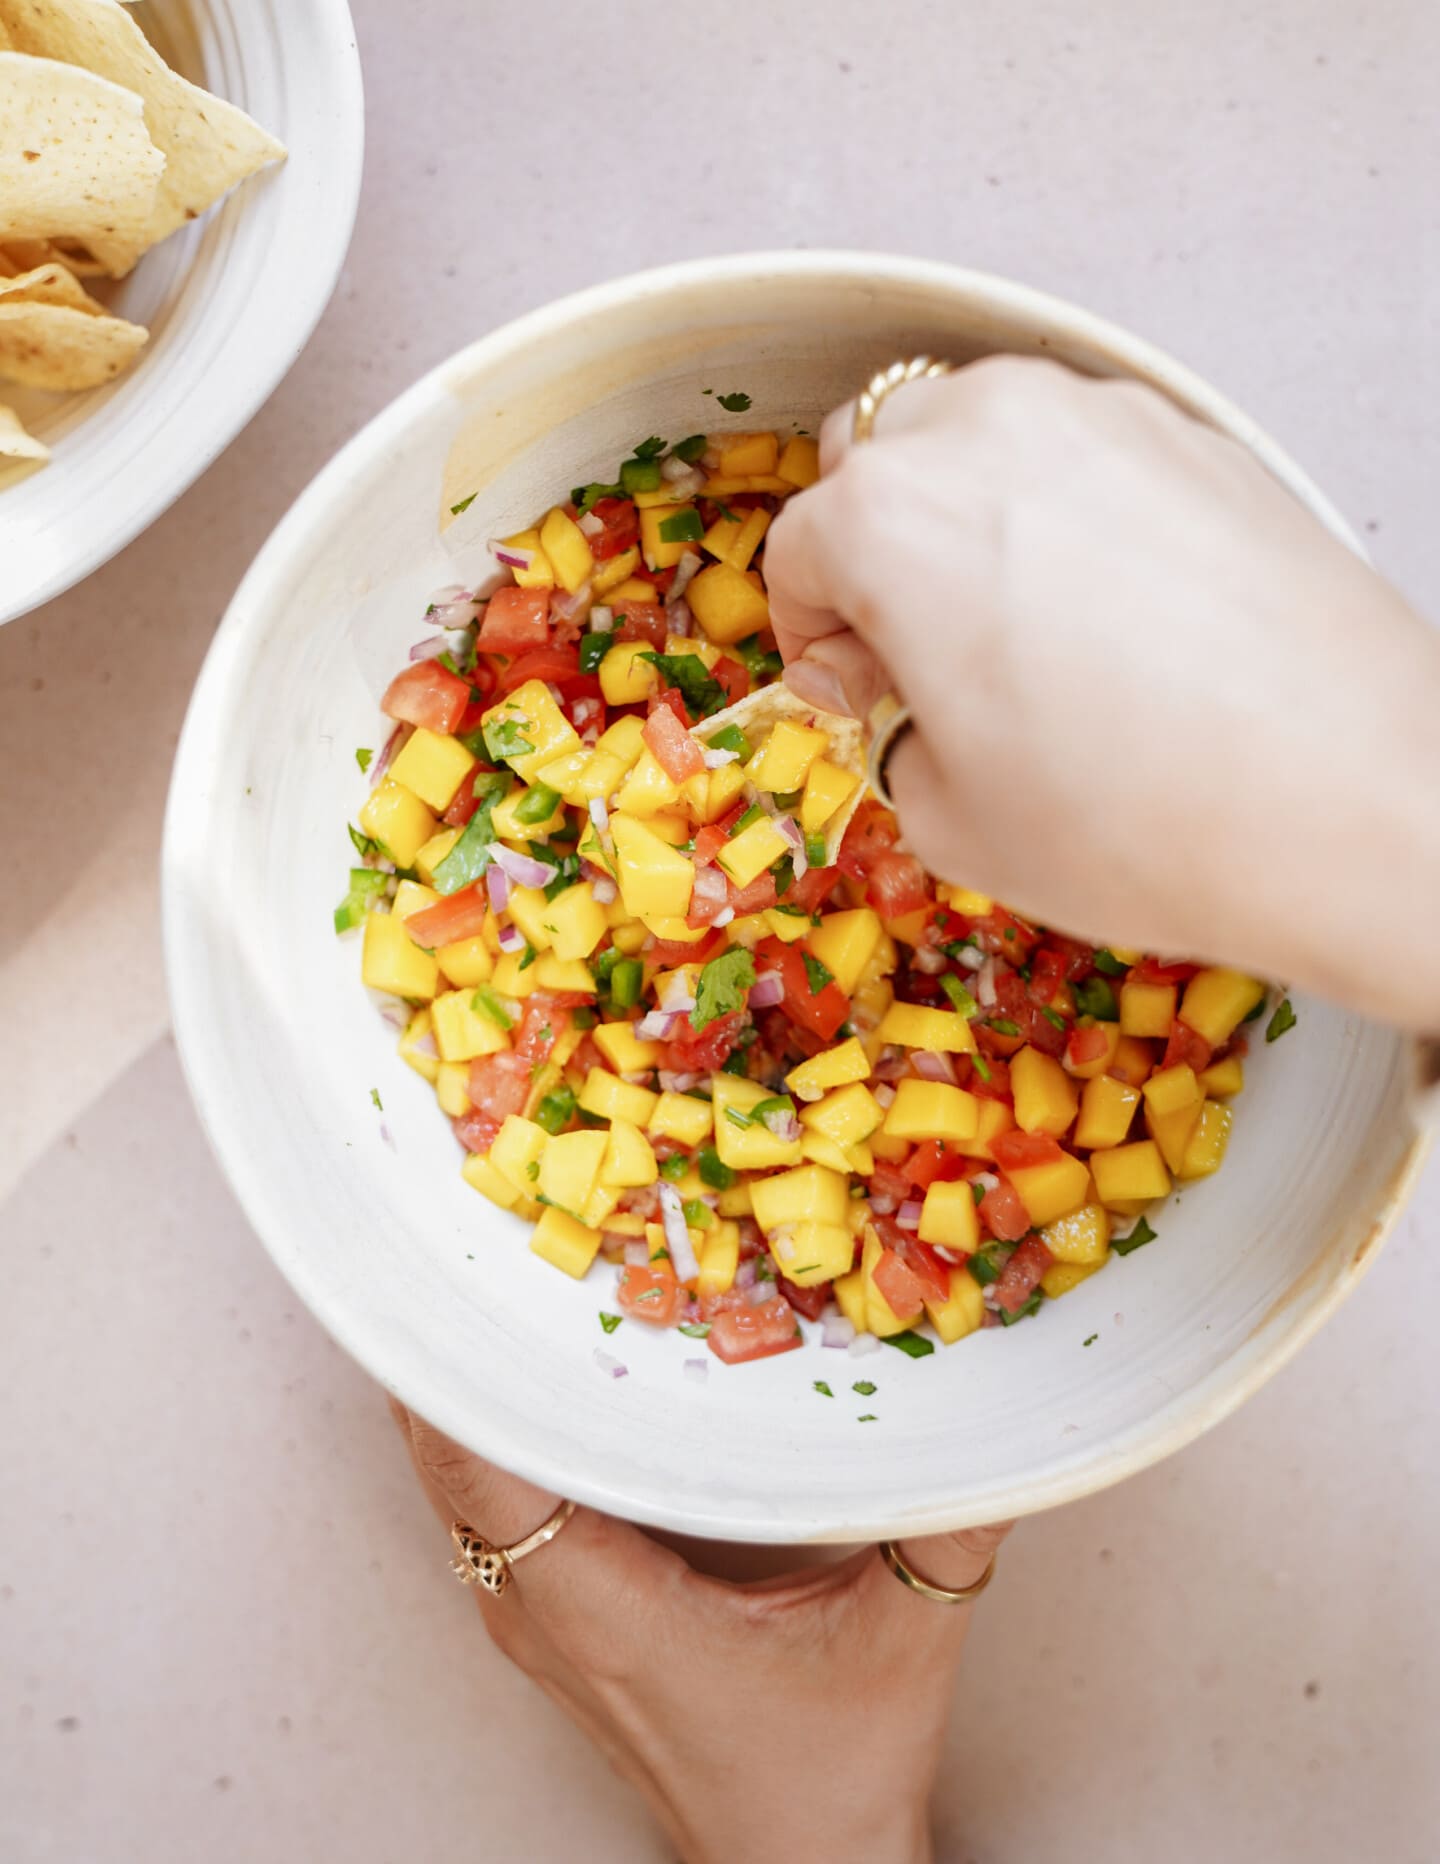 Mixing mango salsa in a bowl